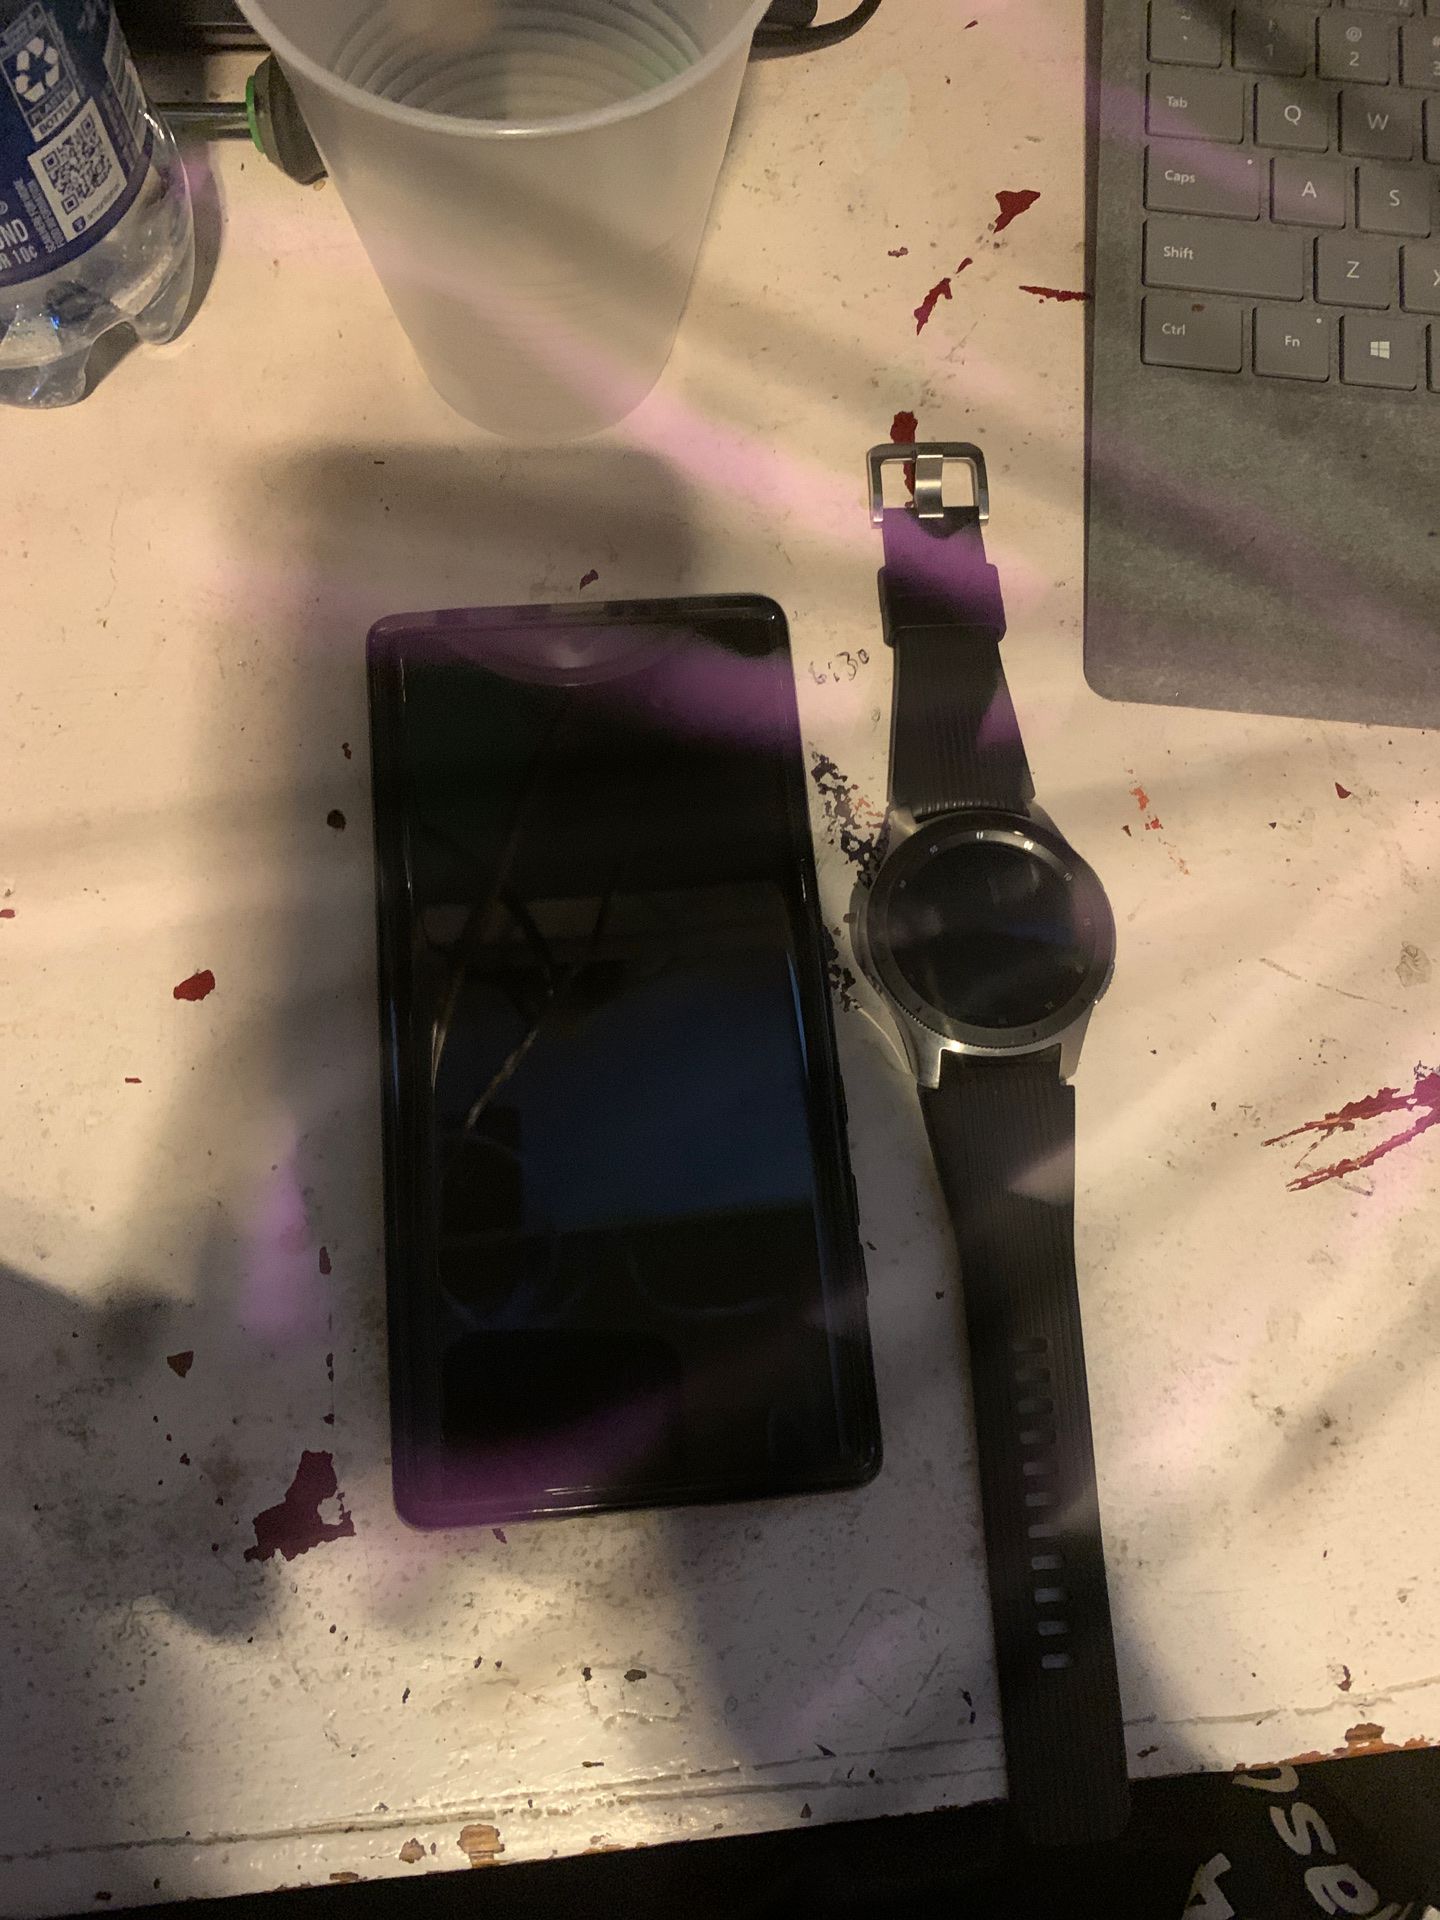 Samsung note 10 and new galaxy watch